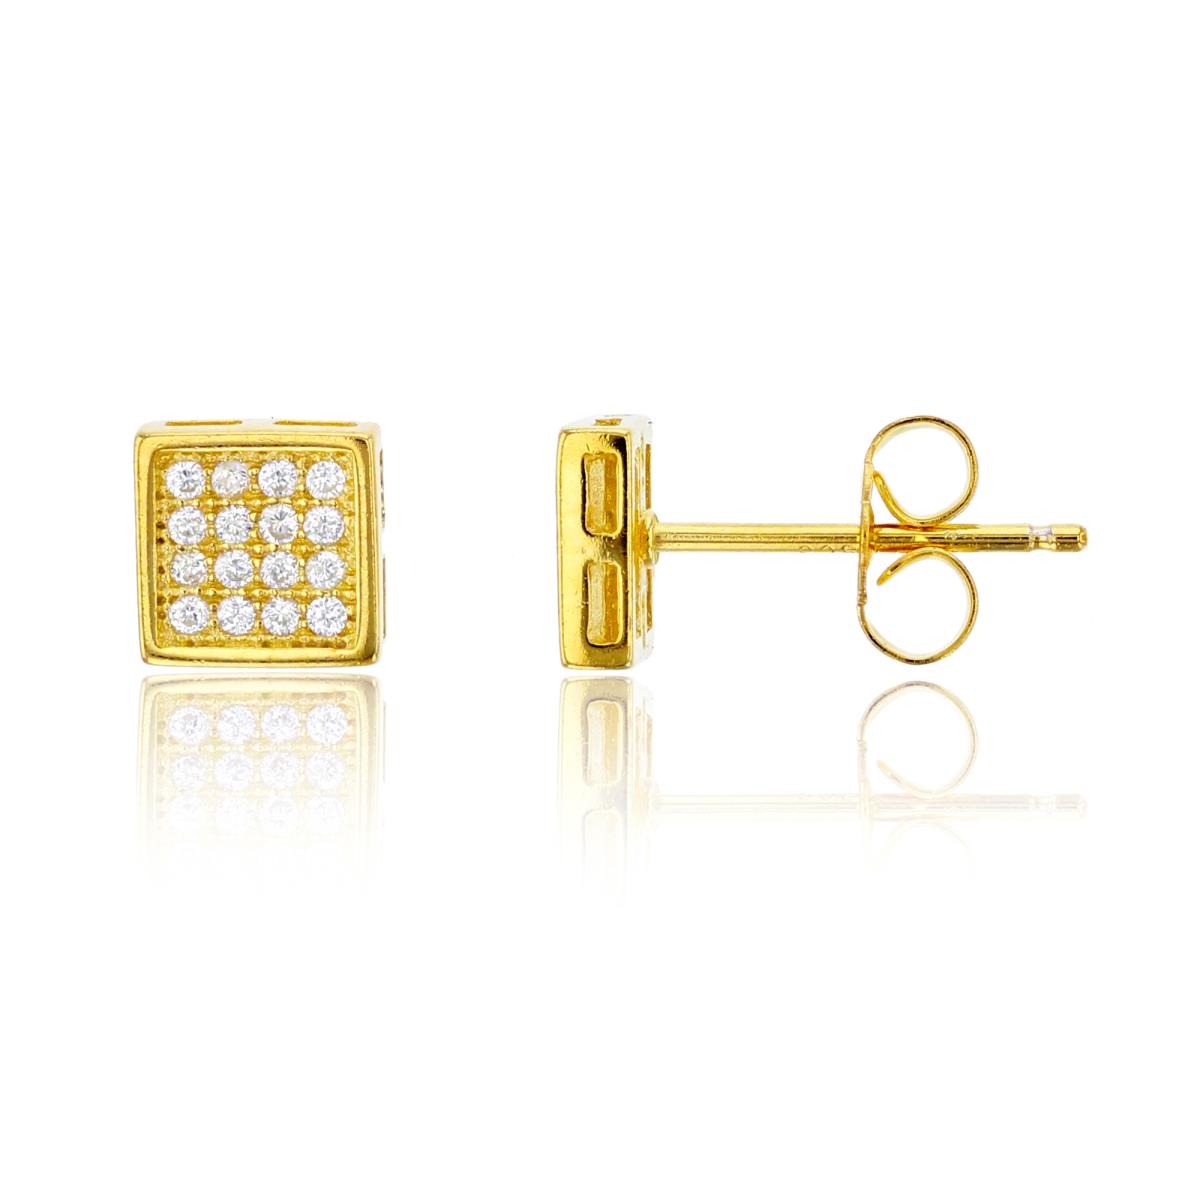 Sterling Silver Yellow 9mm Pave Square Stud Earring